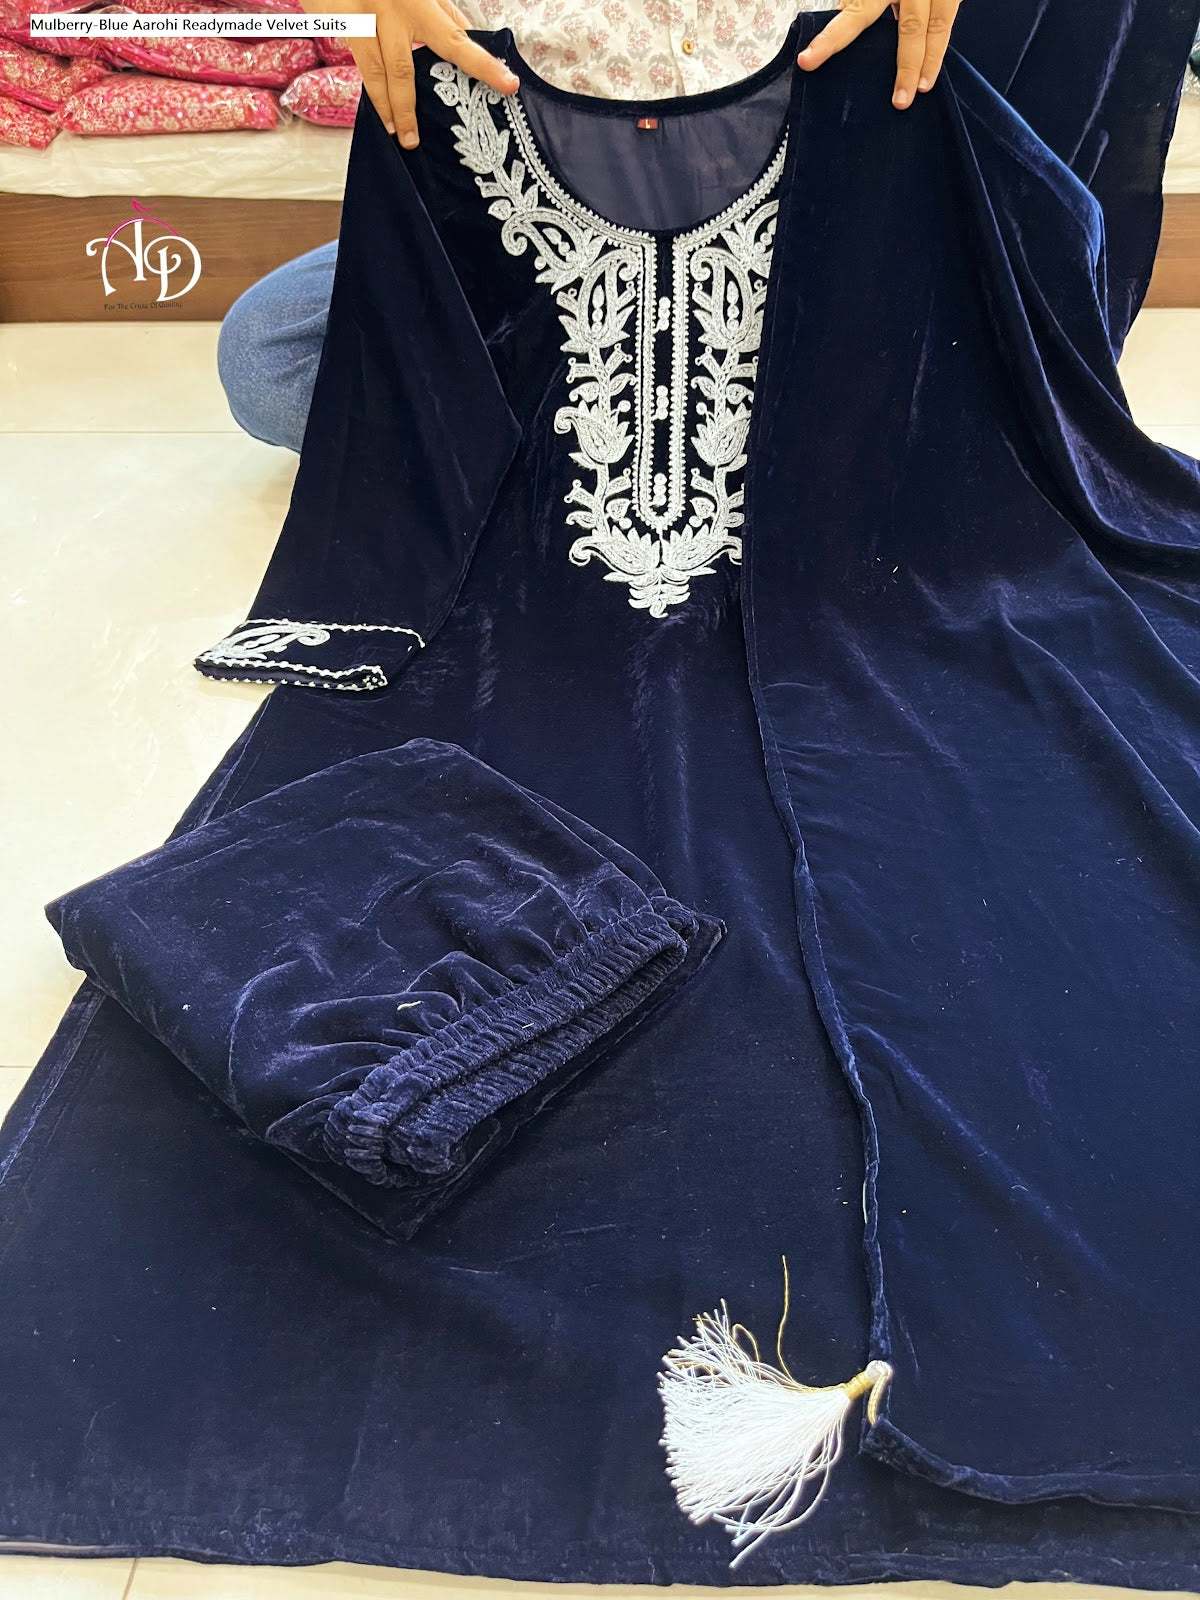 Mulberry-Blue Aarohi Readymade Velvet Suits